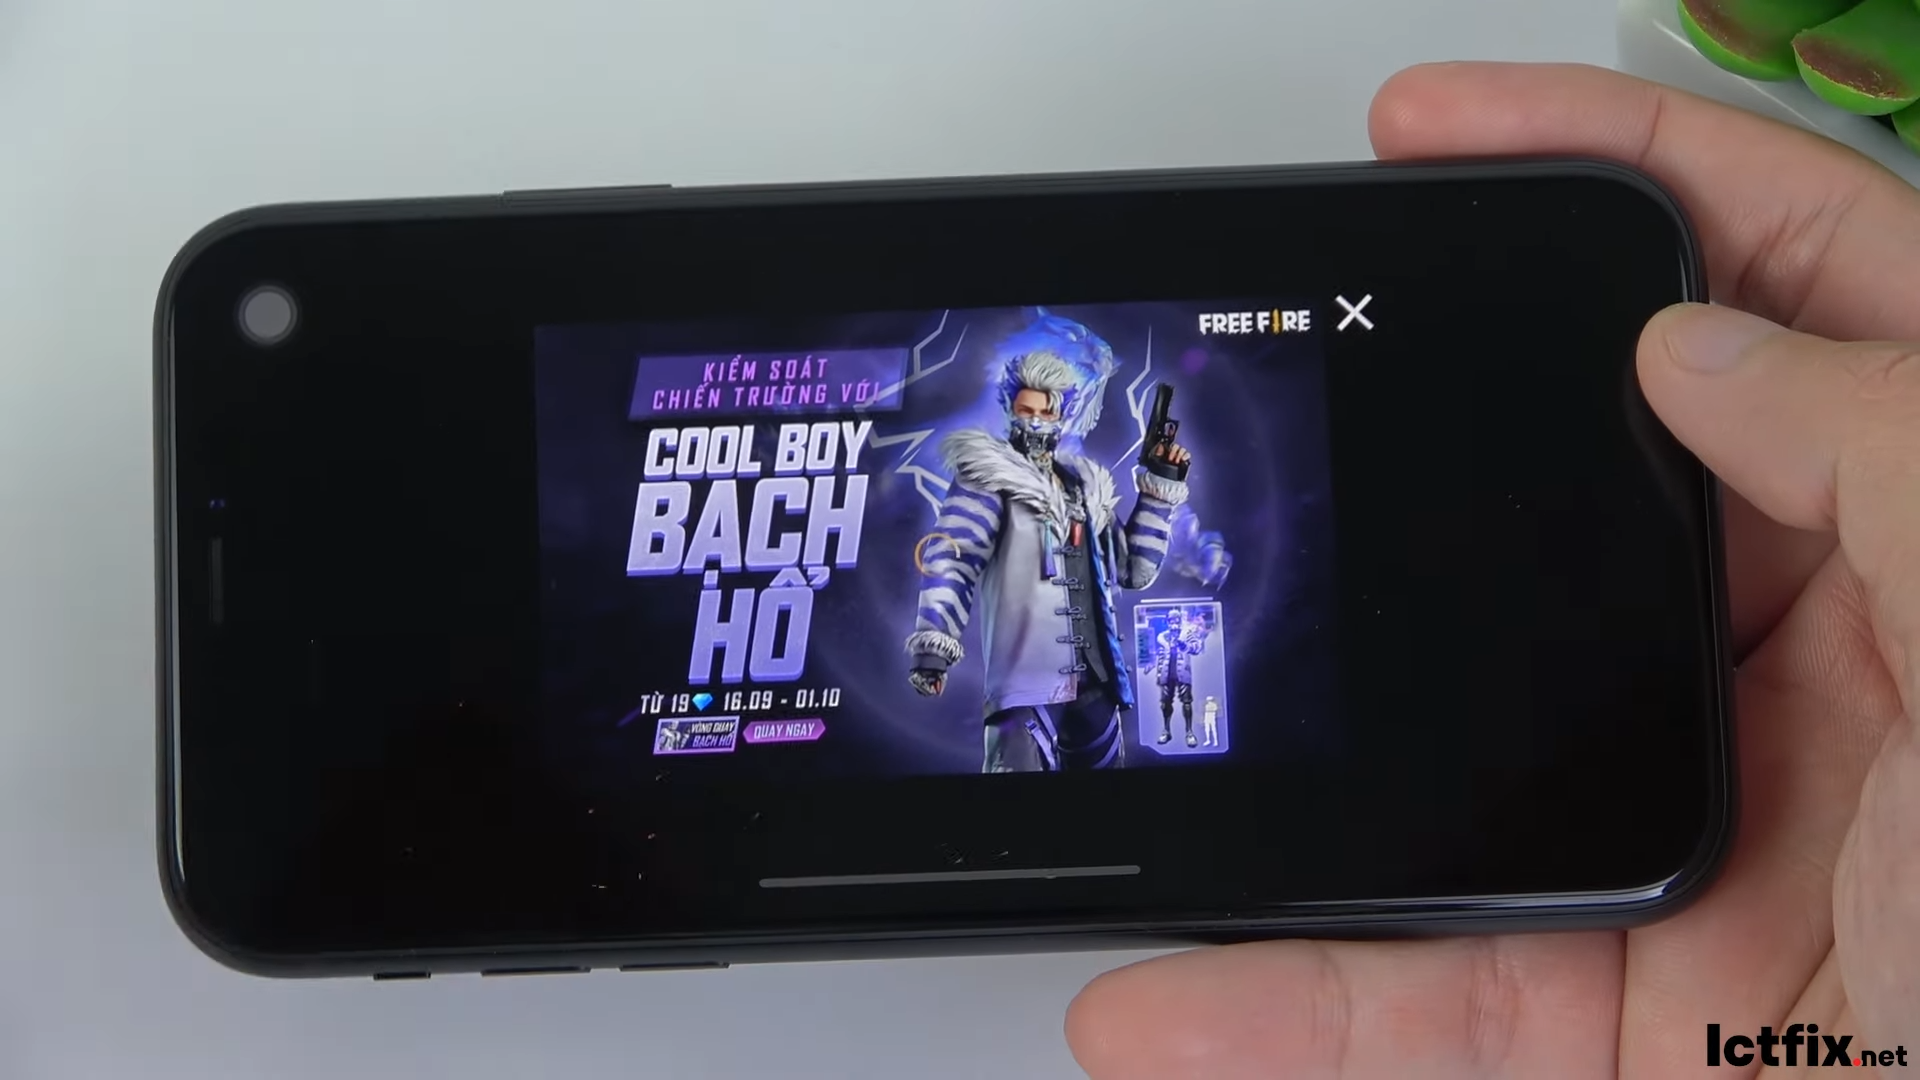 iPhone 11 Pro Max Free Fire Gaming test 2021 Ultra Setting Configuration -  ICTfix